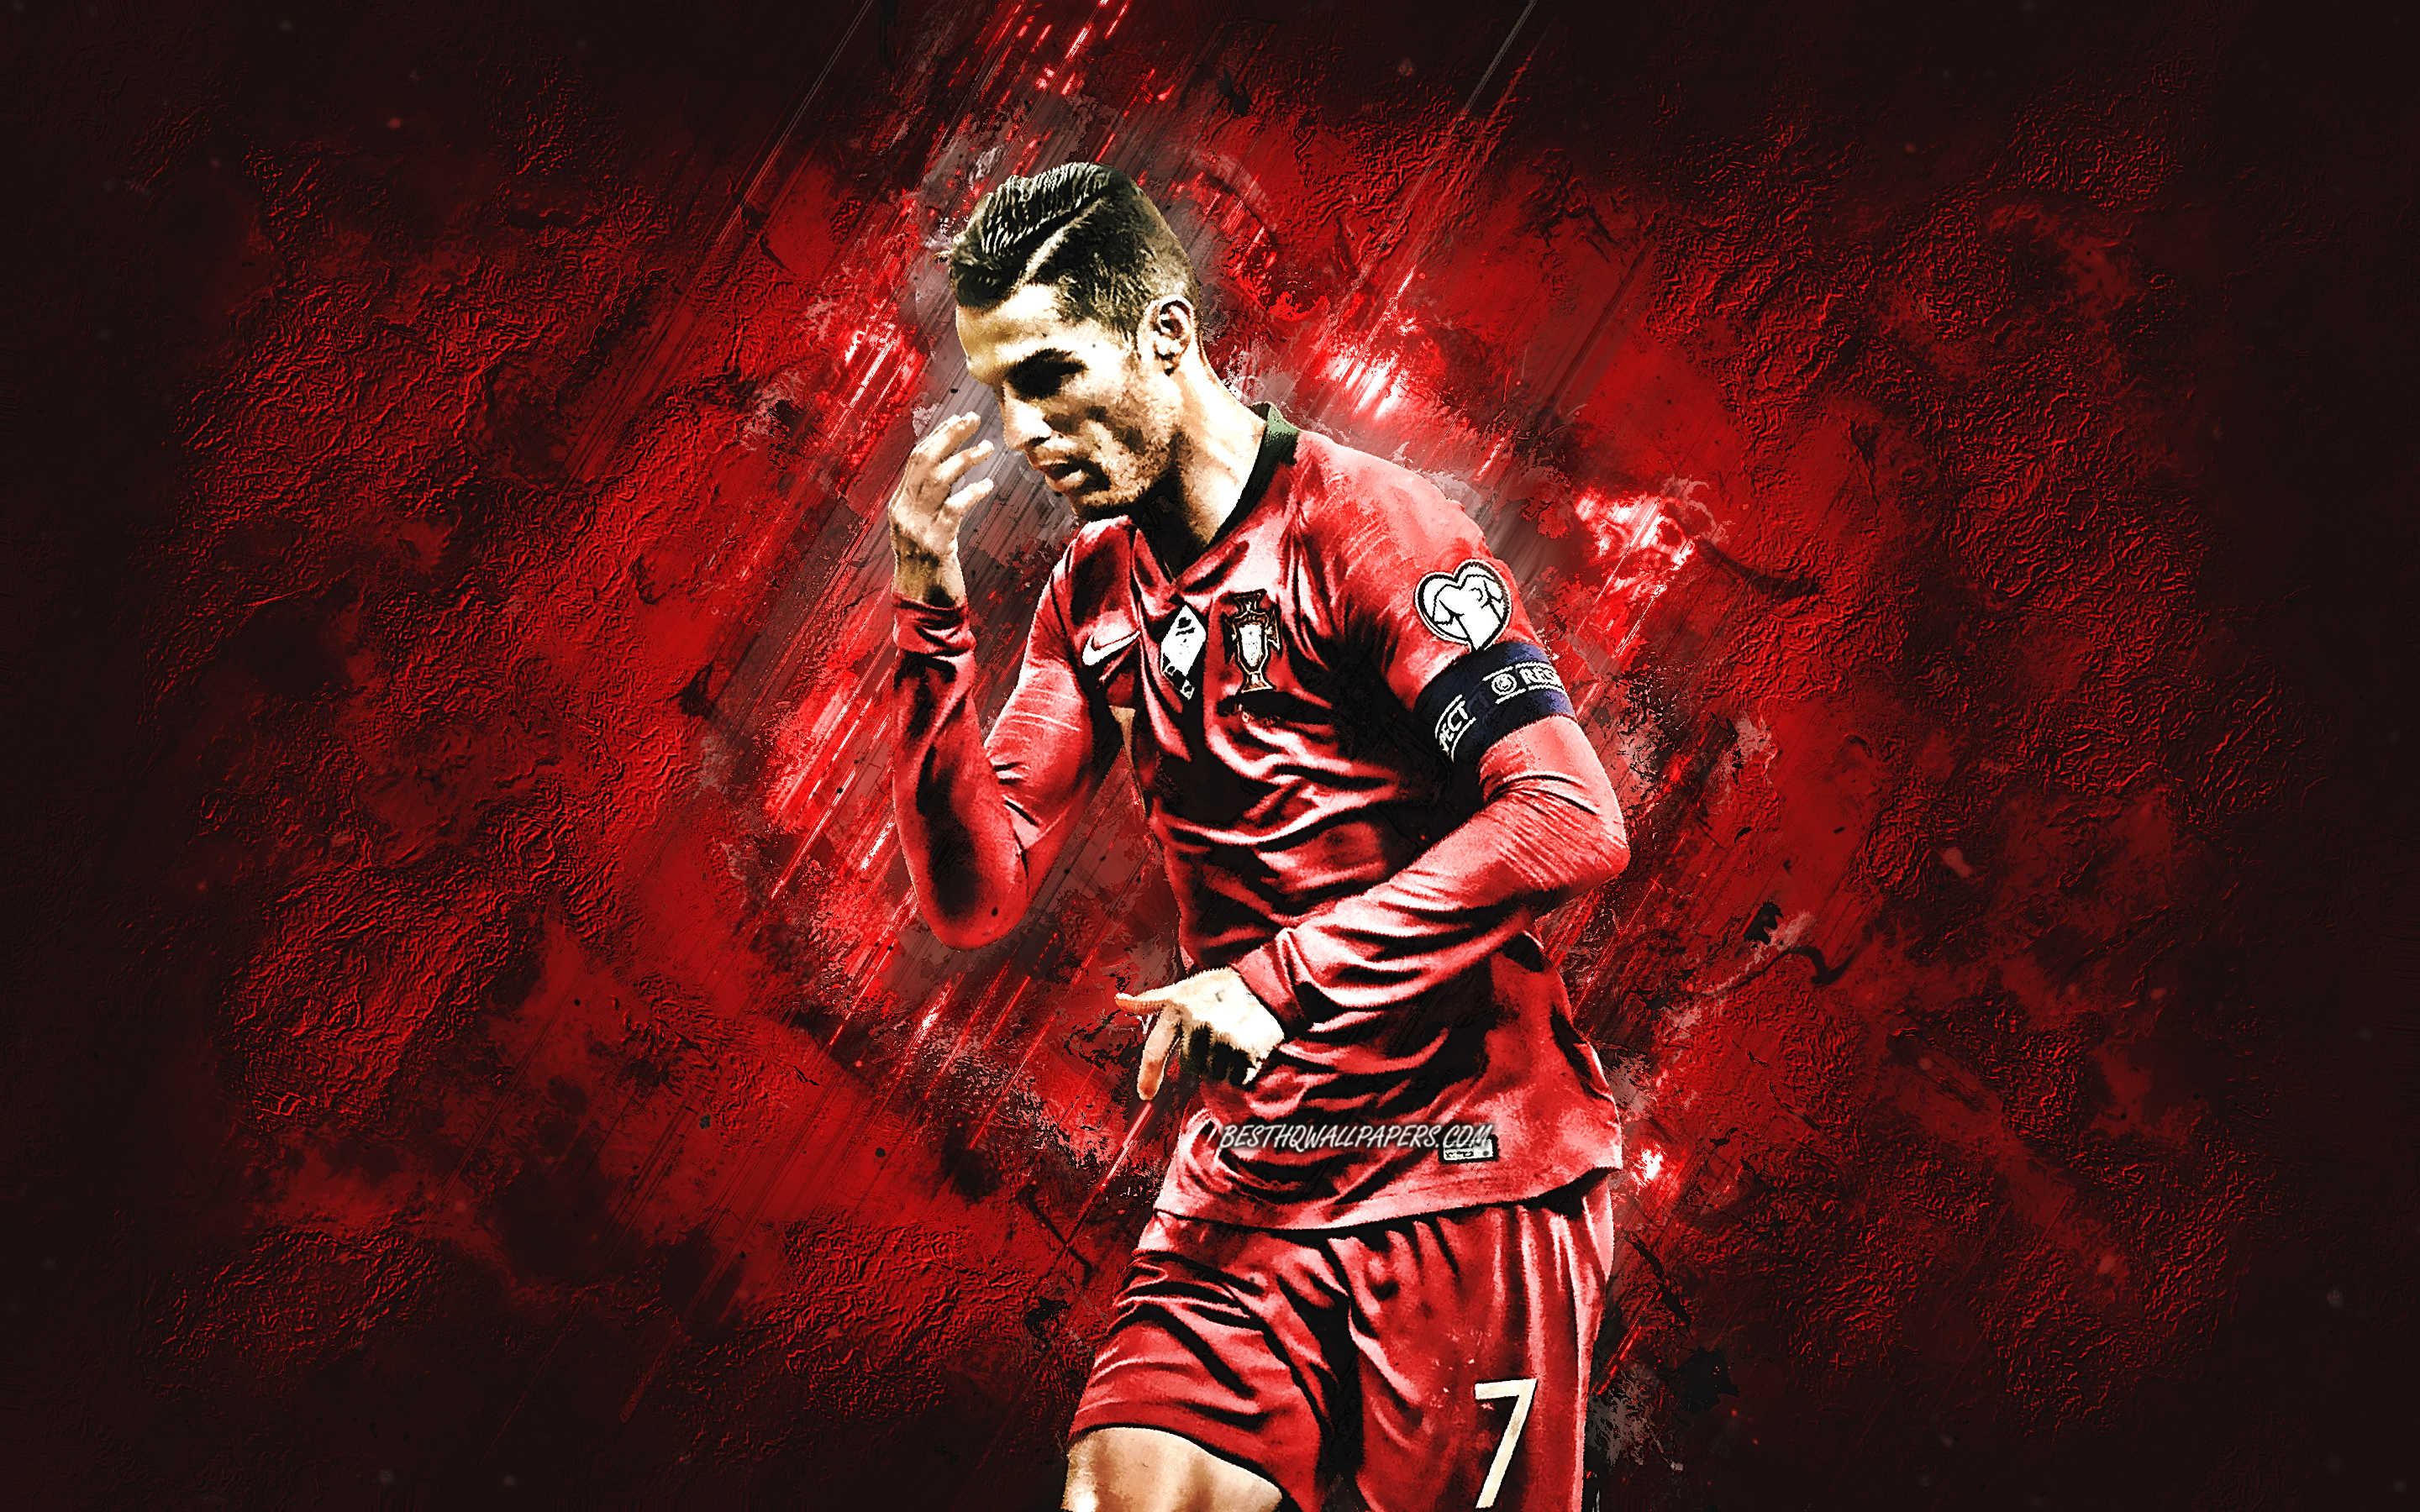 Download wallpaper Cristiano Ronaldo, Portugal national football team, CR portrait, portuguese soccer player, red stone background, football, world soccer star, Portugal for desktop with resolution 2880x1800. High Quality HD picture wallpaper